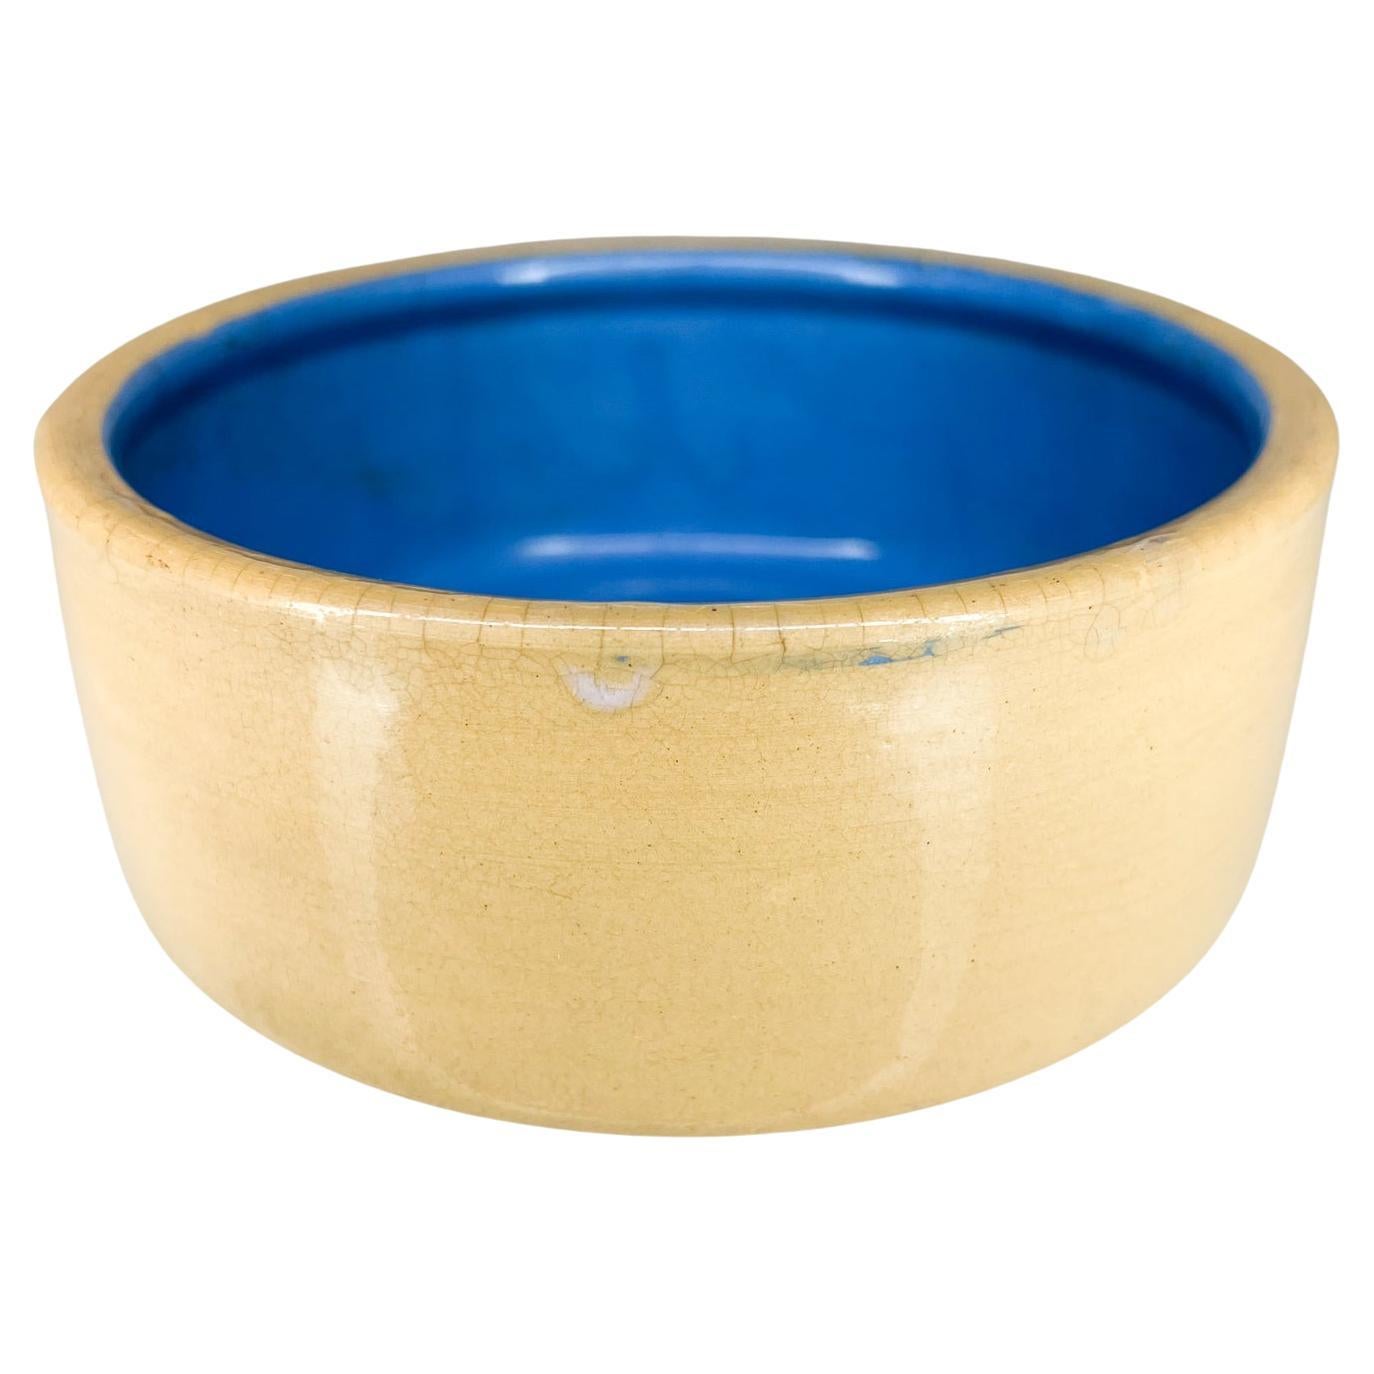 1960s Vintage Dreamy Blue Tan Cereal Ceramic Bowl made in England
6 diameter x 2.38 tall
Beautiful color combination 
MADE IN ENGLAND, stamp underneath.
Preowned unrestored vintage condition.
See images provided.
